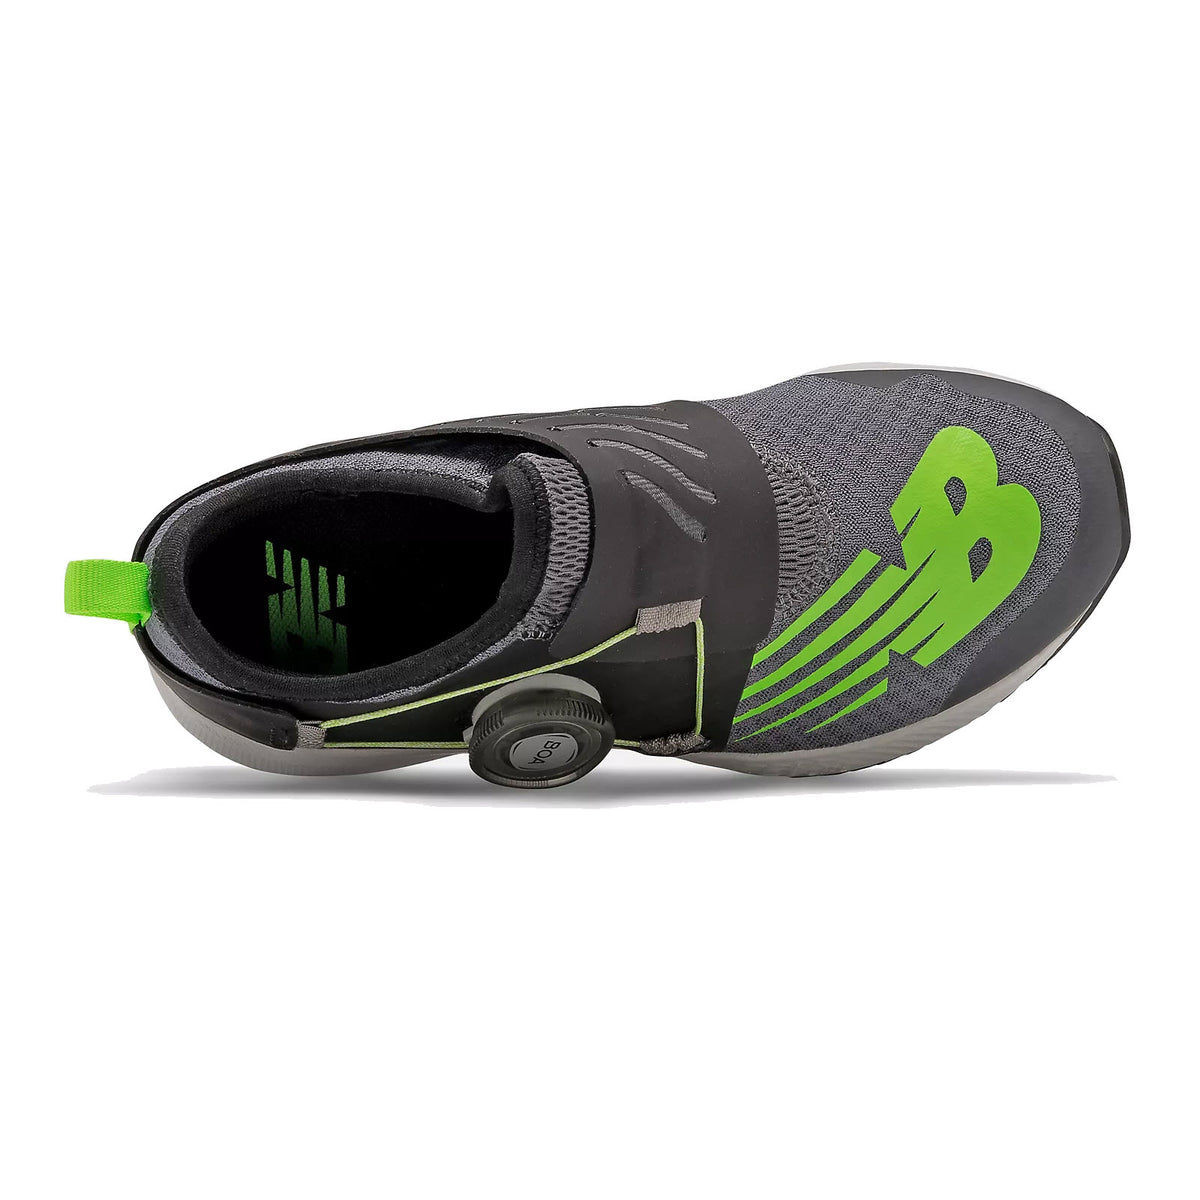 A top-down view of a gray New Balance Fuelcore Reveal Boa sport shoe with neon green accents and a Boa® Fit System strap.